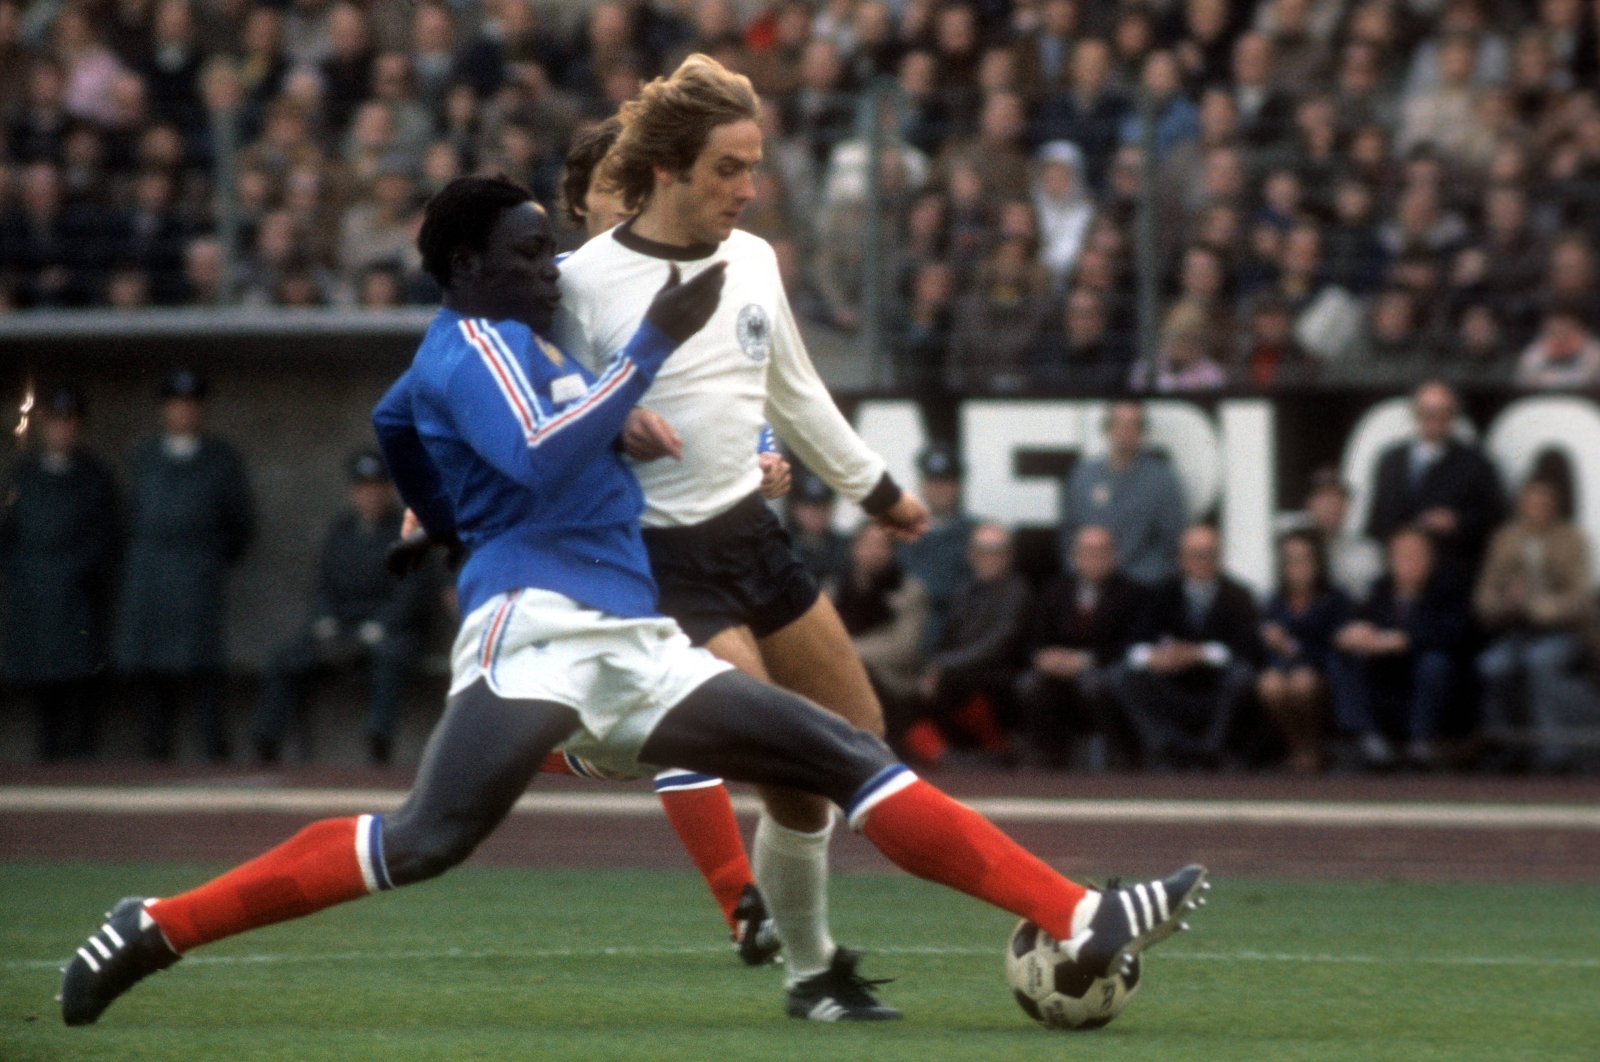 France defender Jean-Pierre Adams (L) challenges Germany's Helmut Kremers in this undated photo. (IMAGOIMAGES Photo)